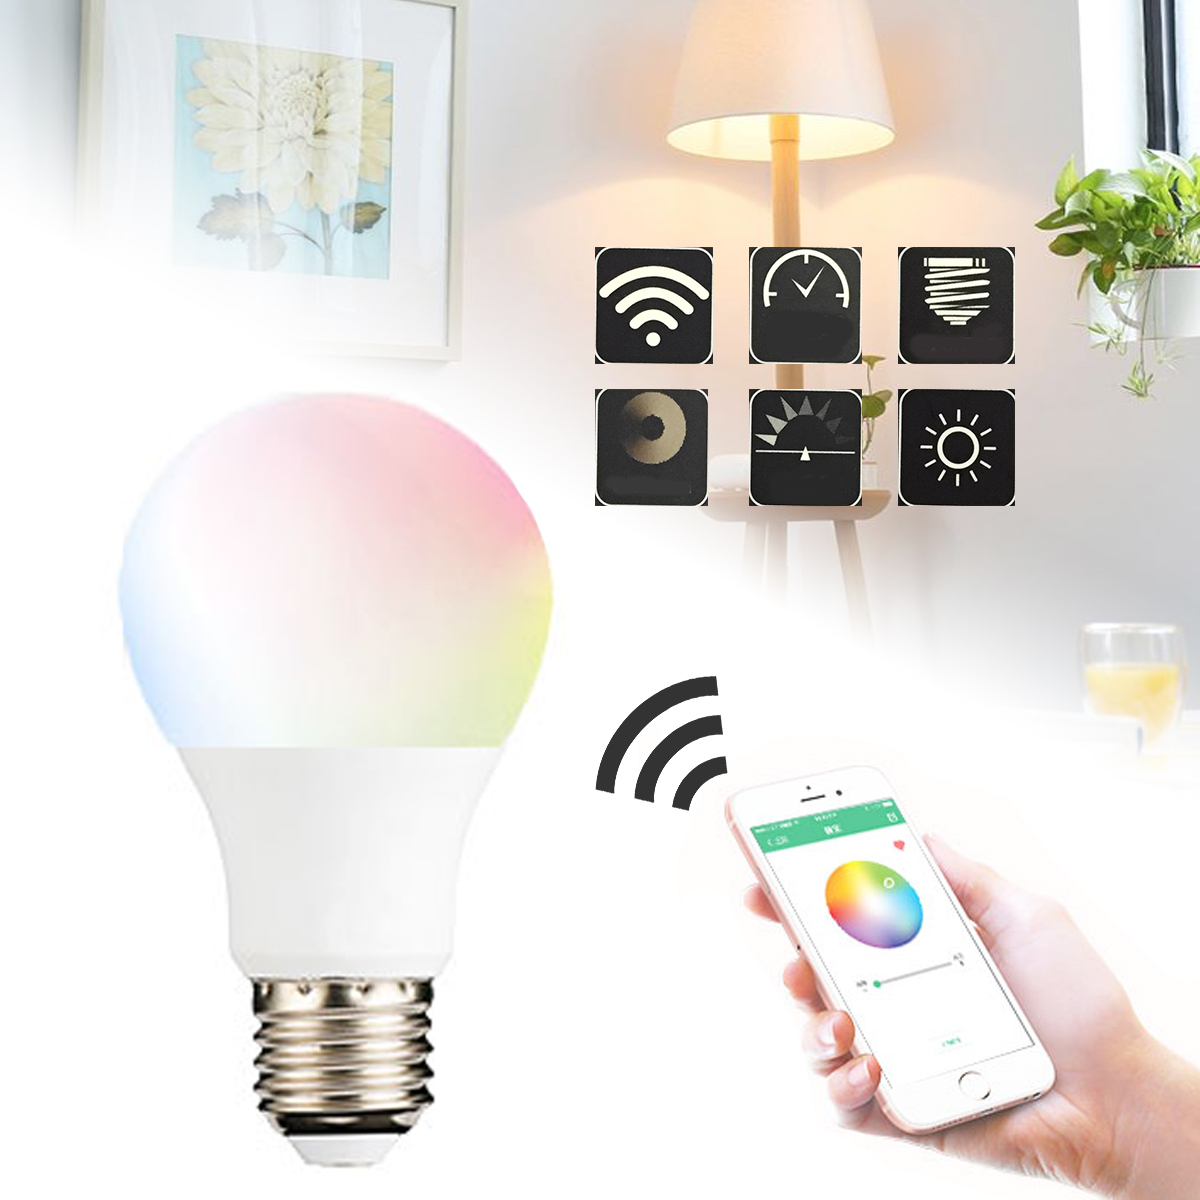 

4.5W E27 WIFI Control Light Smart Bulb Wireless Dimmable RGBW LED Lamp Home Decorate AC85-265V